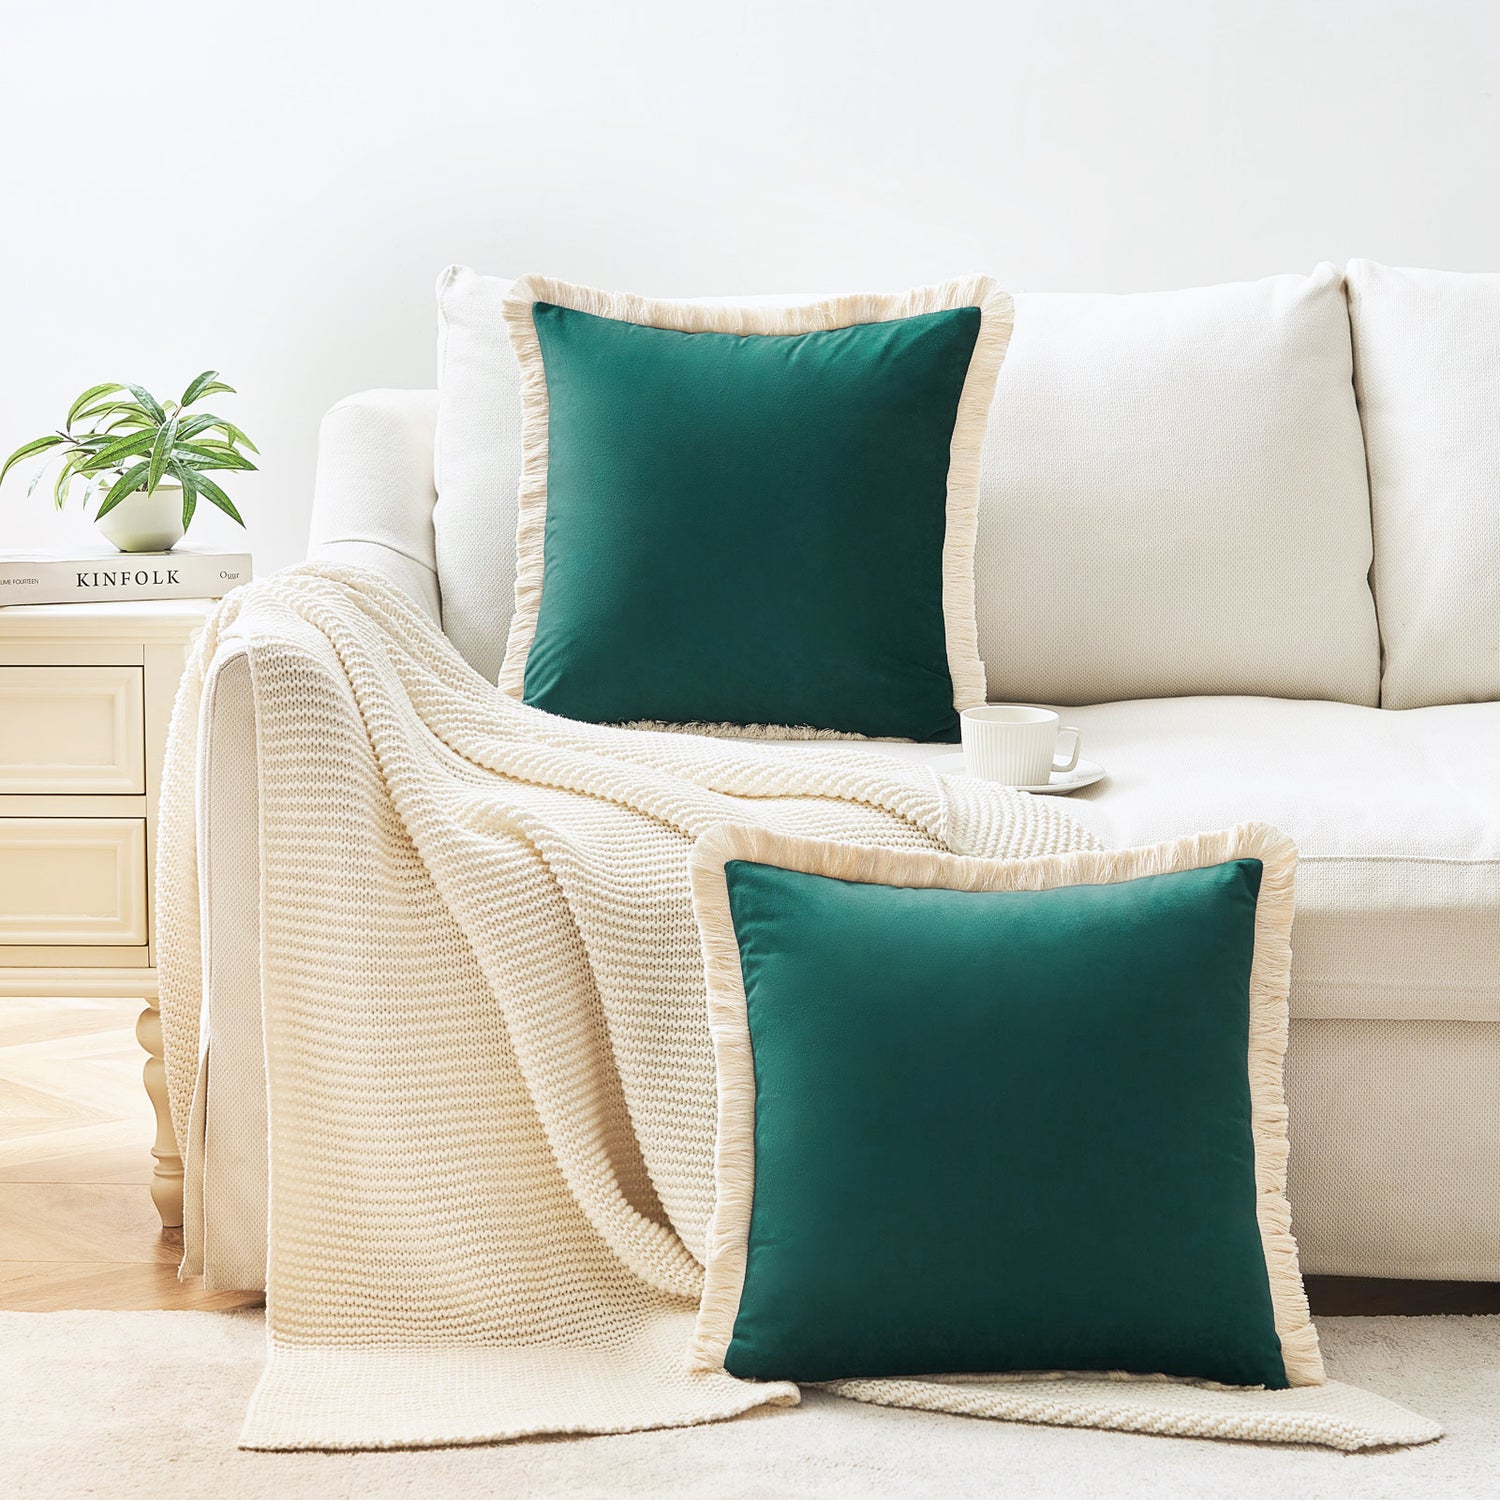 velvet decorative throw pillow covers  with fringe border set of 2 teal green color